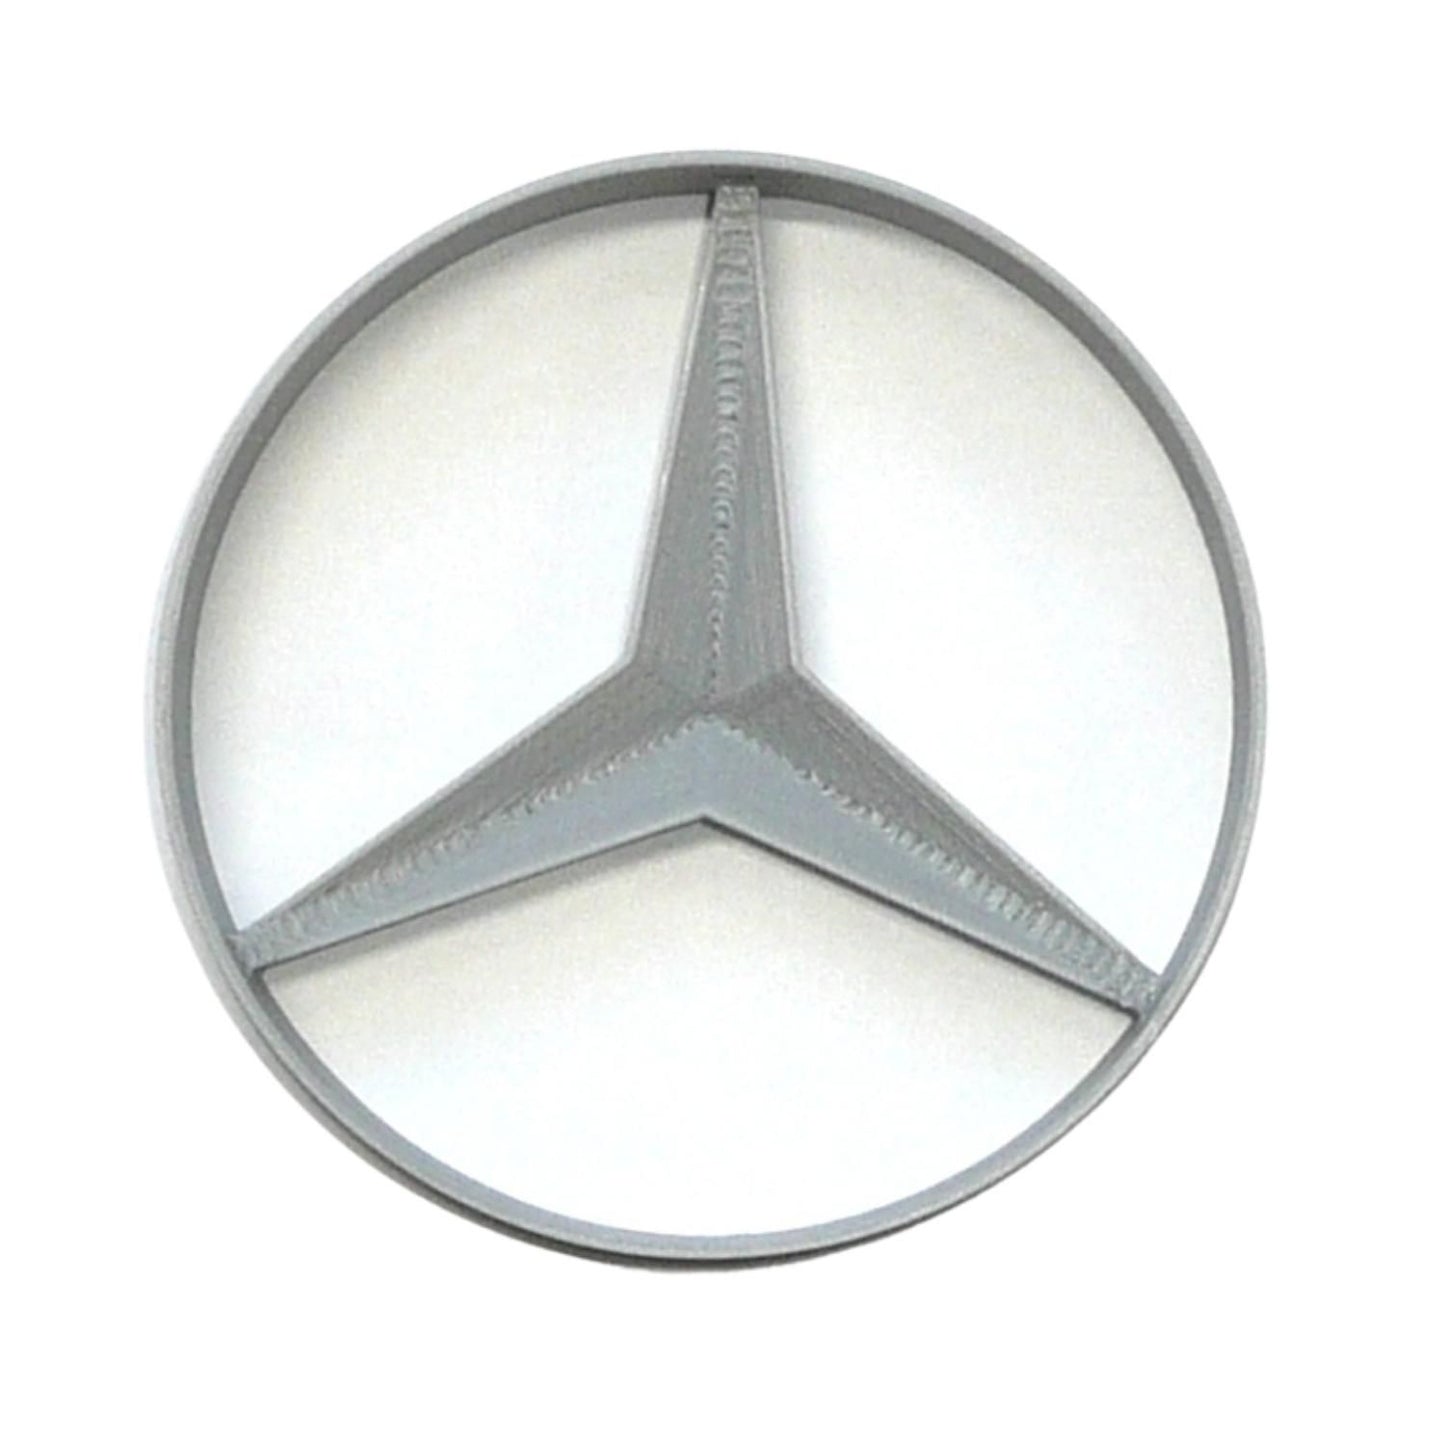 Mercedes Benz Luxury Vehicle Iconic Symbol Cookie Cutter Made In USA PR4539